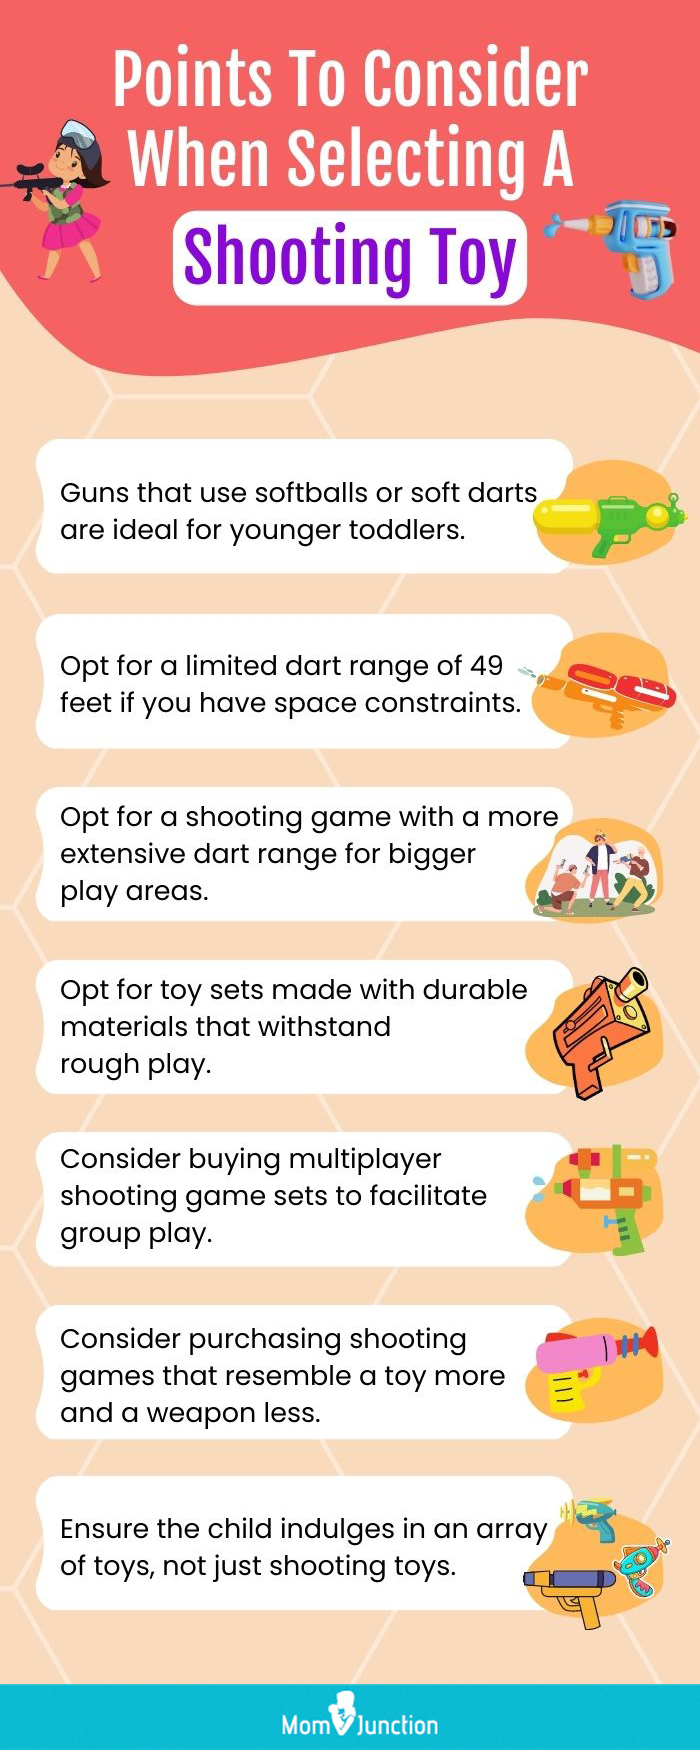 Points To Consider When Selecting A Shooting Toy (infographic)